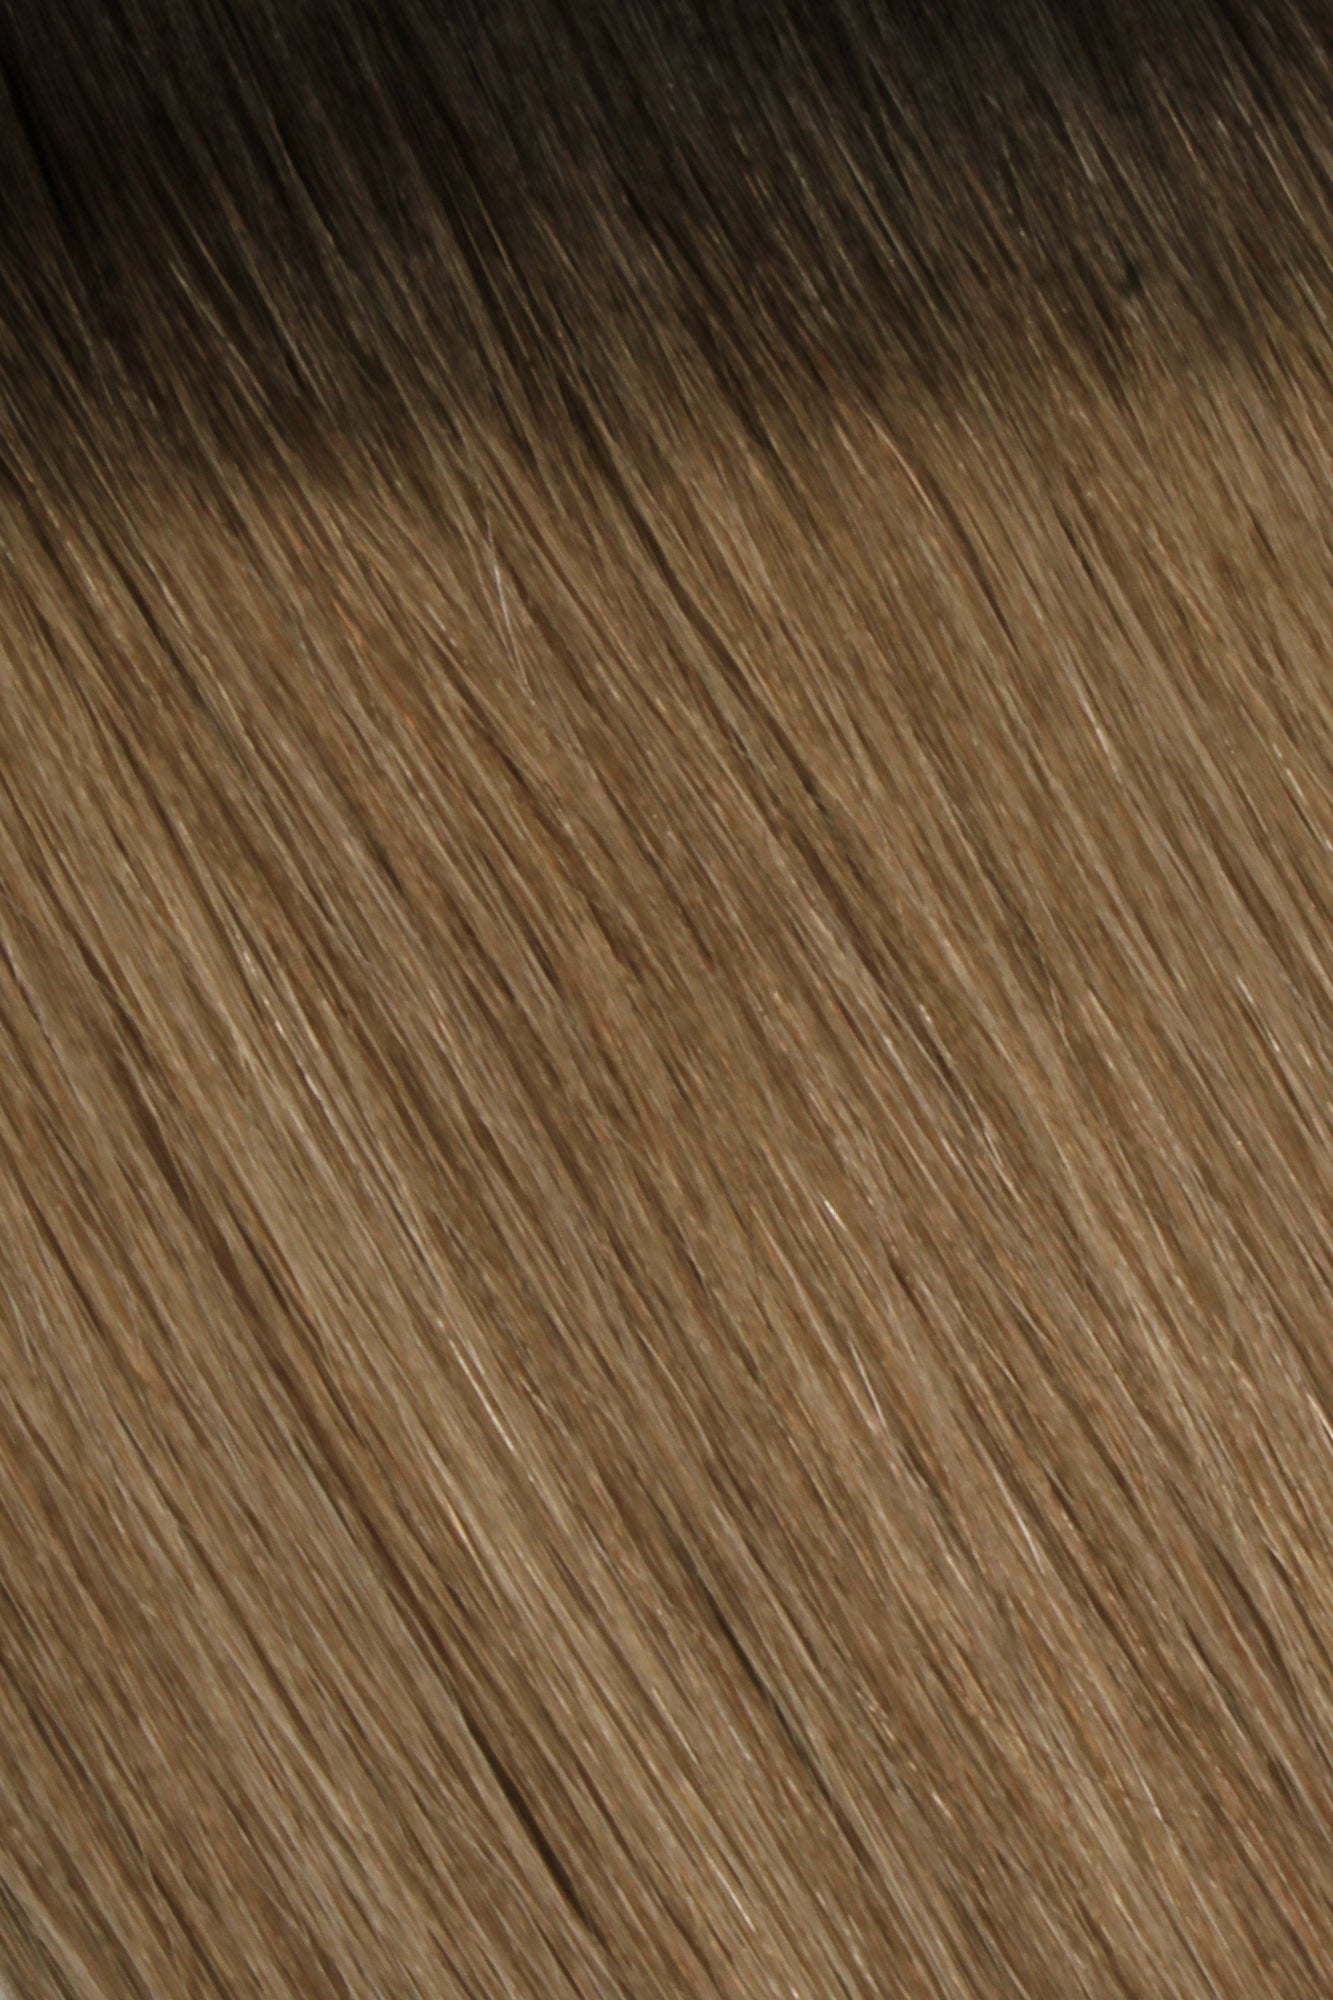 SEAMLESS® Flat Weft 20 Inches - SWAY Hair Extensions Mochaccino-Melt-R2-6-24 Natural SEAMLESS® Flat Weft 20 Inches extensions. Thin, flexible, and discreet. 100% Double Drawn Remy Human Hair. Versatile and reusable